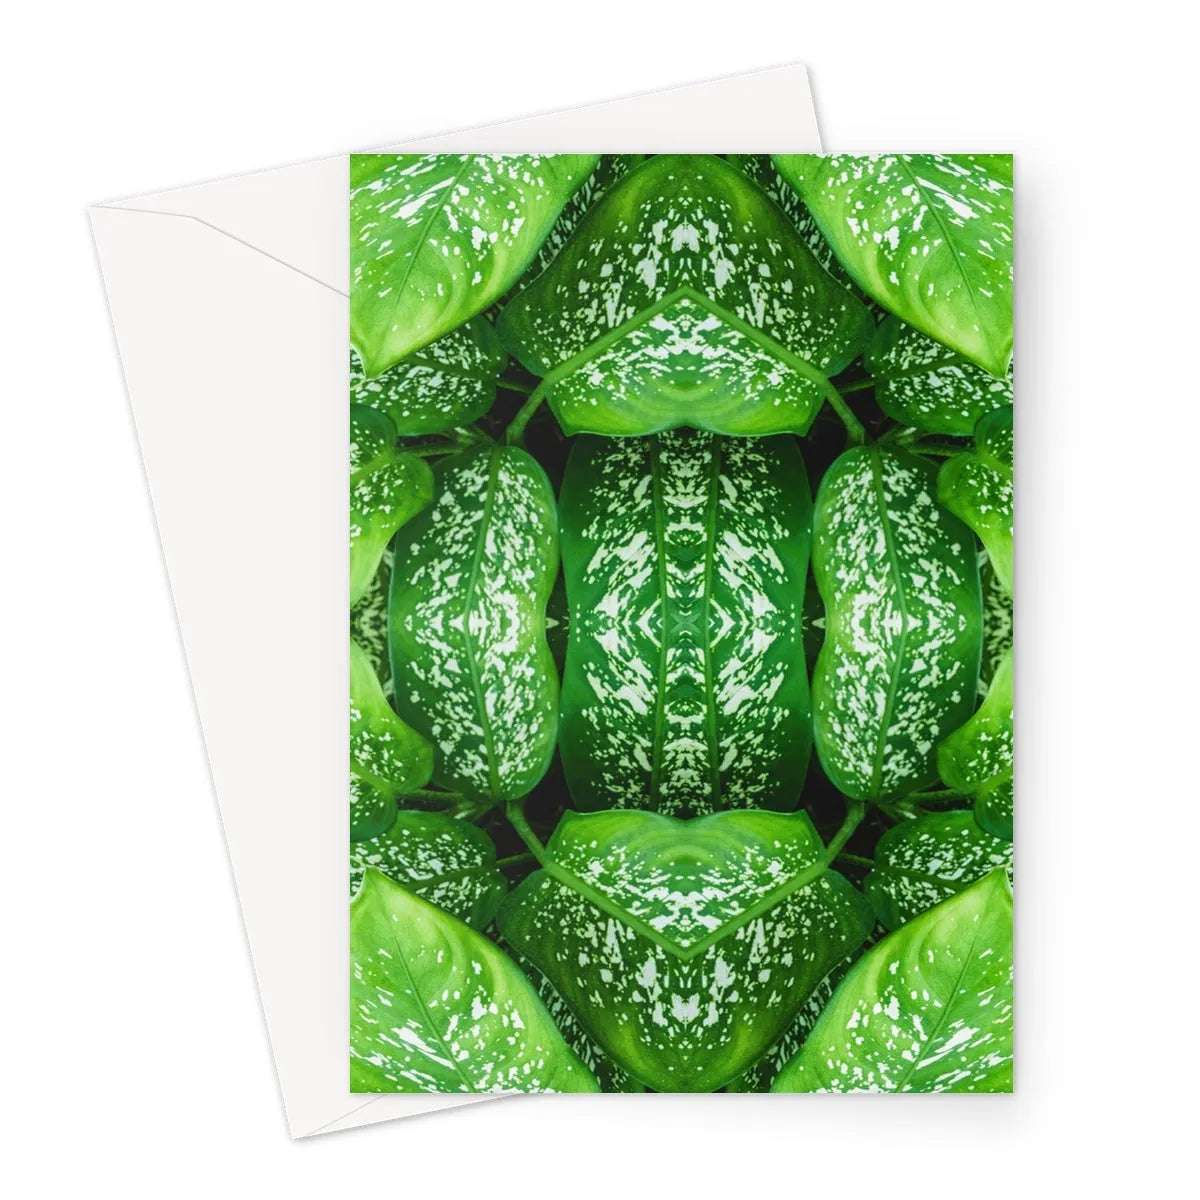 Pitter Splatter Greeting Card - A5 Portrait / 10 Cards - Greeting & Note Cards - Aesthetic Art